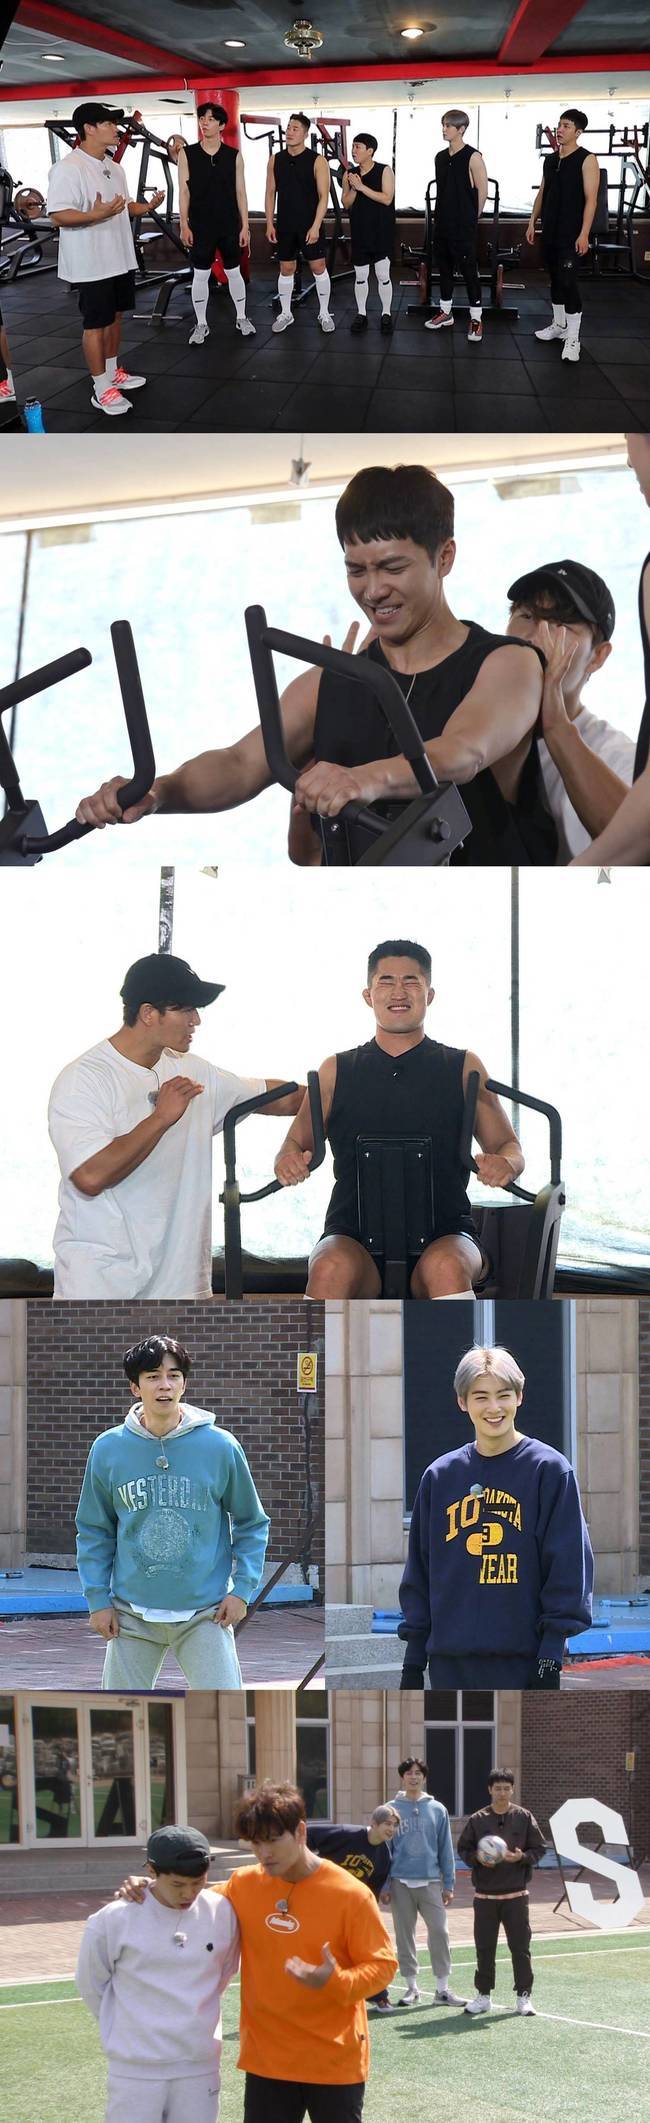 Hardcore Holly Health routine by Kim Jong-kook will be unveiled at All The ButlersOn April 25, SBS All The Butlers will be broadcasted at 6:25 pm, and the Hardcore Holly ExerciseRace track will be held without an exit prepared by Master Kim Jong-kook.Kim Jong-kook, who gave delicious Exercise tips to members from the last broadcast to bed, will guide members to a gym called the Myuschulin restaurant this time.Kim Jong-kook, who could not hide his excitement about Exercise, showed extreme exercise with different dimensions such as Squat 140kg carrying Kim Dong-Hyun.The members were surprised to see Kim Jong-kooks back muscles, which were stimulated and angry, and that he was surprised that he felt full of eggs in his crab-backed carapace.In addition, the members challenged the circit training of hell proposed by Kim Jong-kook.Kim Jong-kook table Mara Taste ExerciseRace Track without a break I wonder who will survive safely.